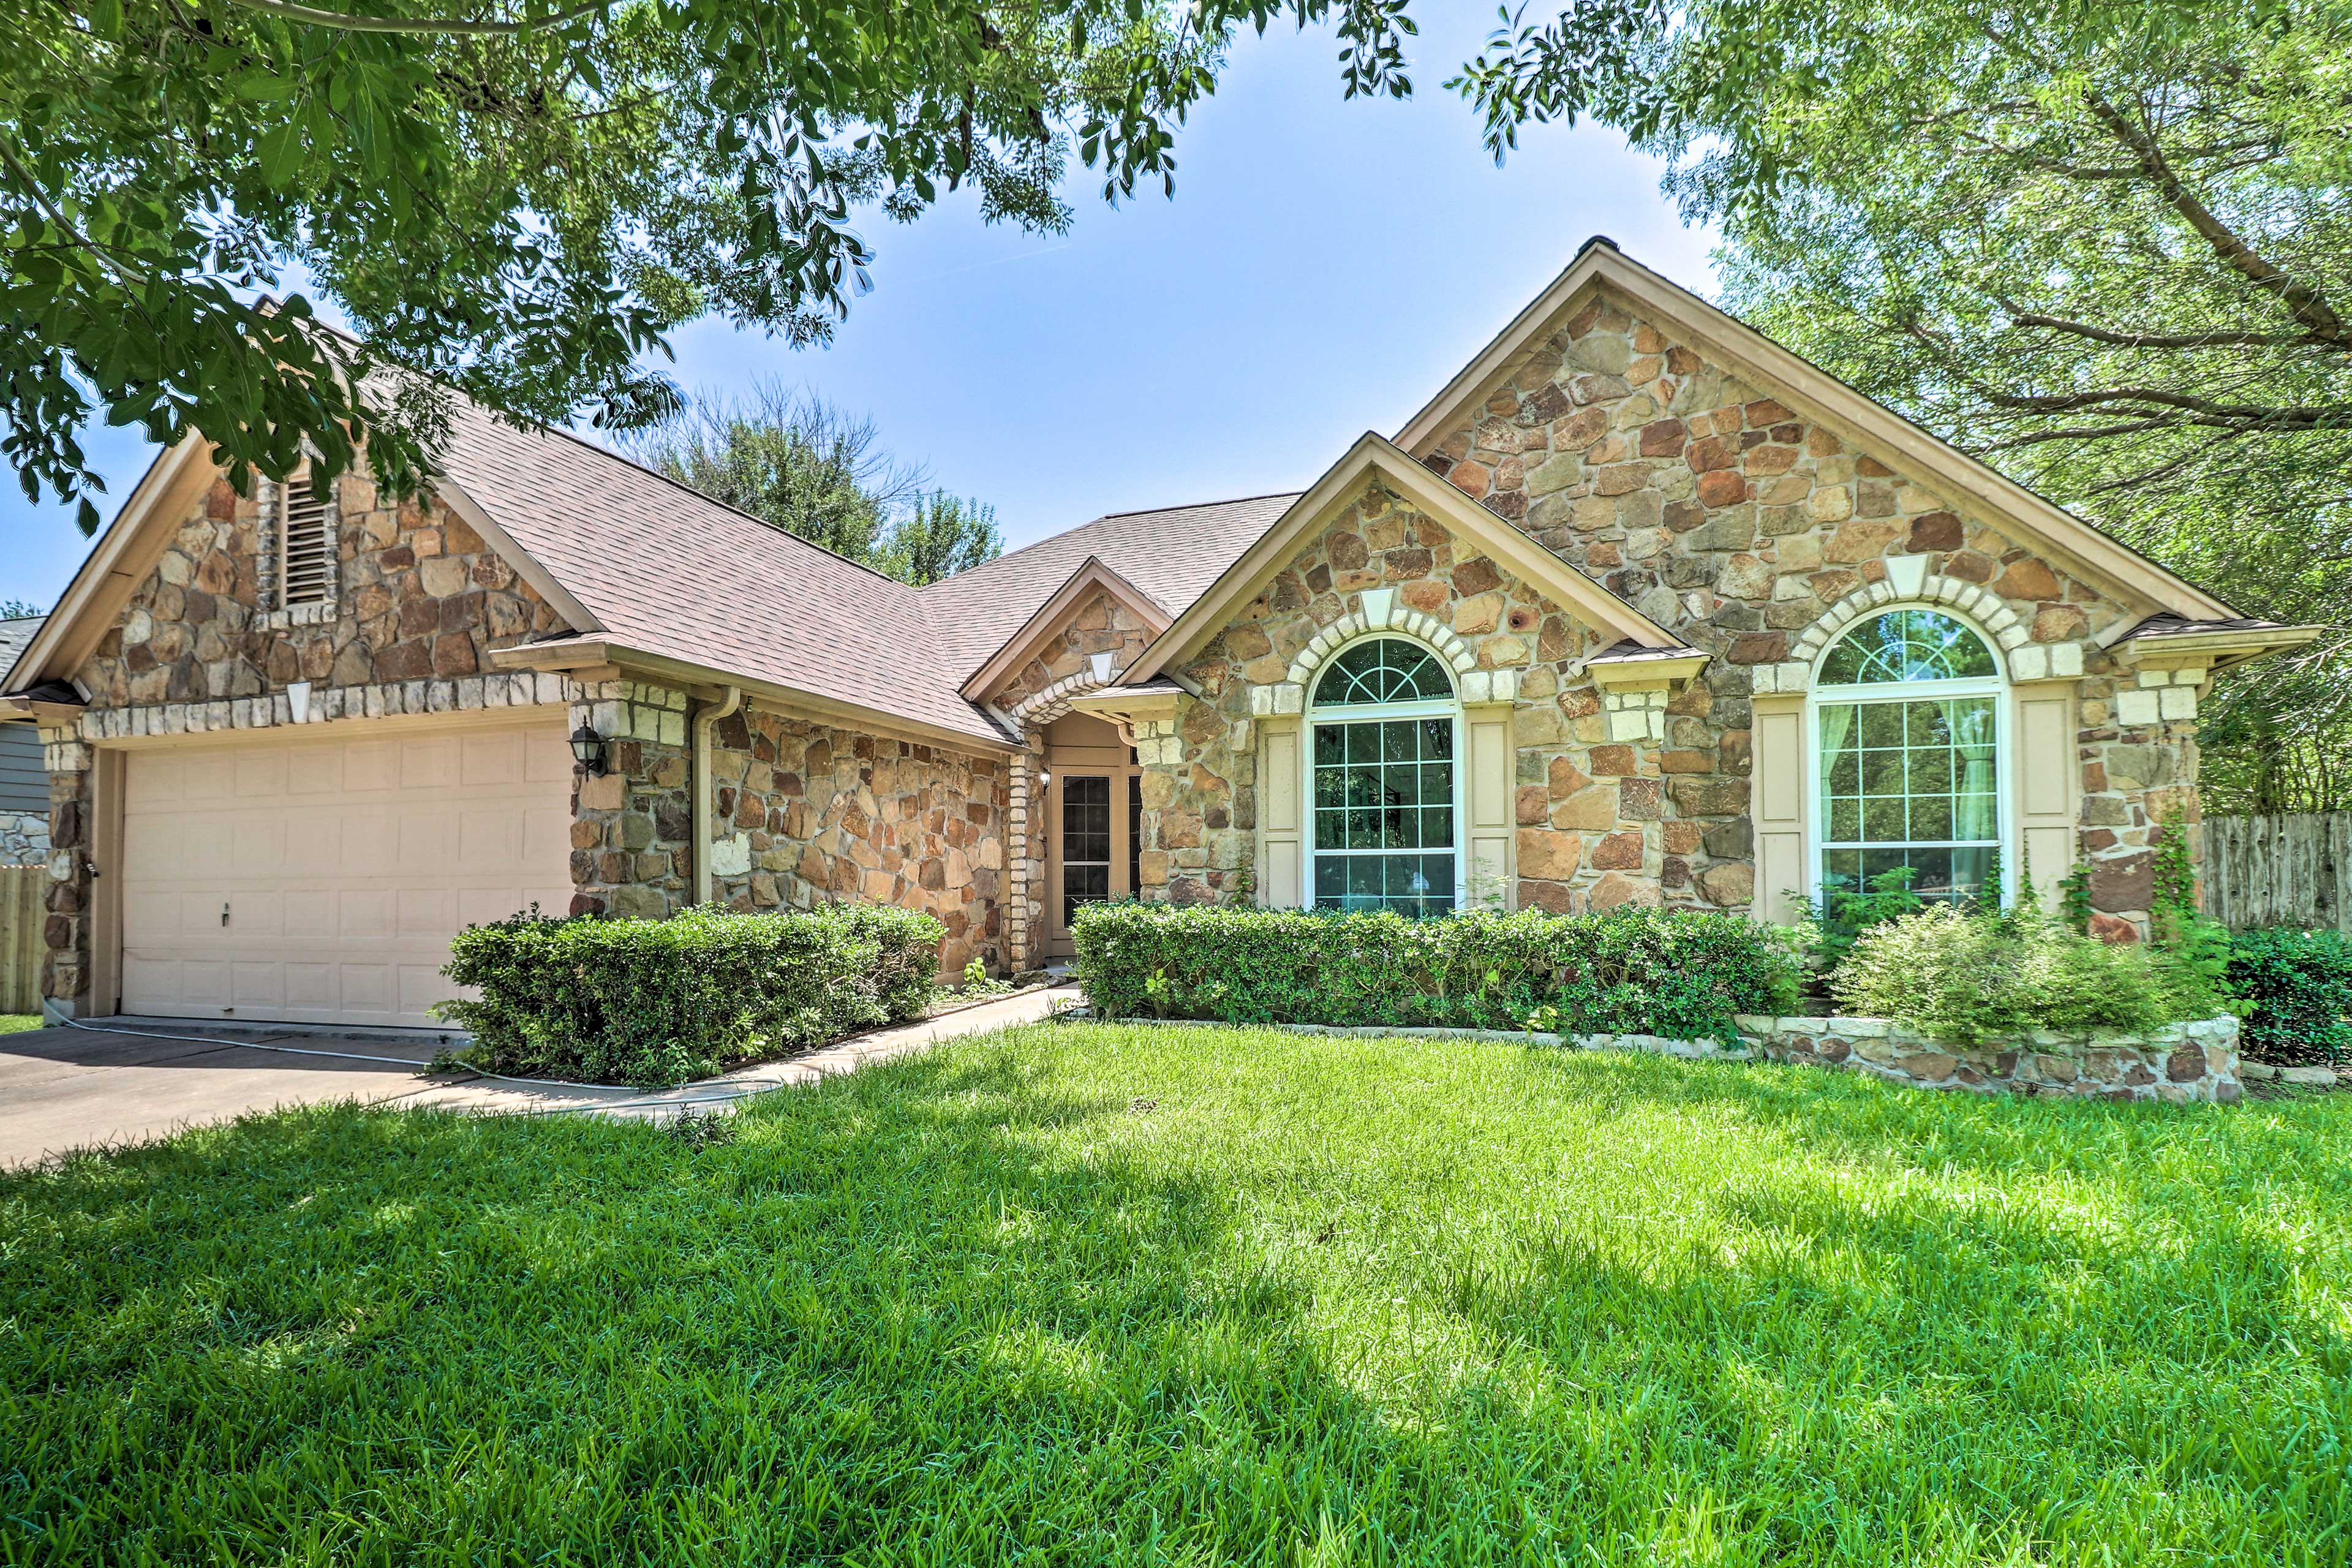 Property Image 1 - NEW! Round Rock Family Home: Large Yard, By Trails